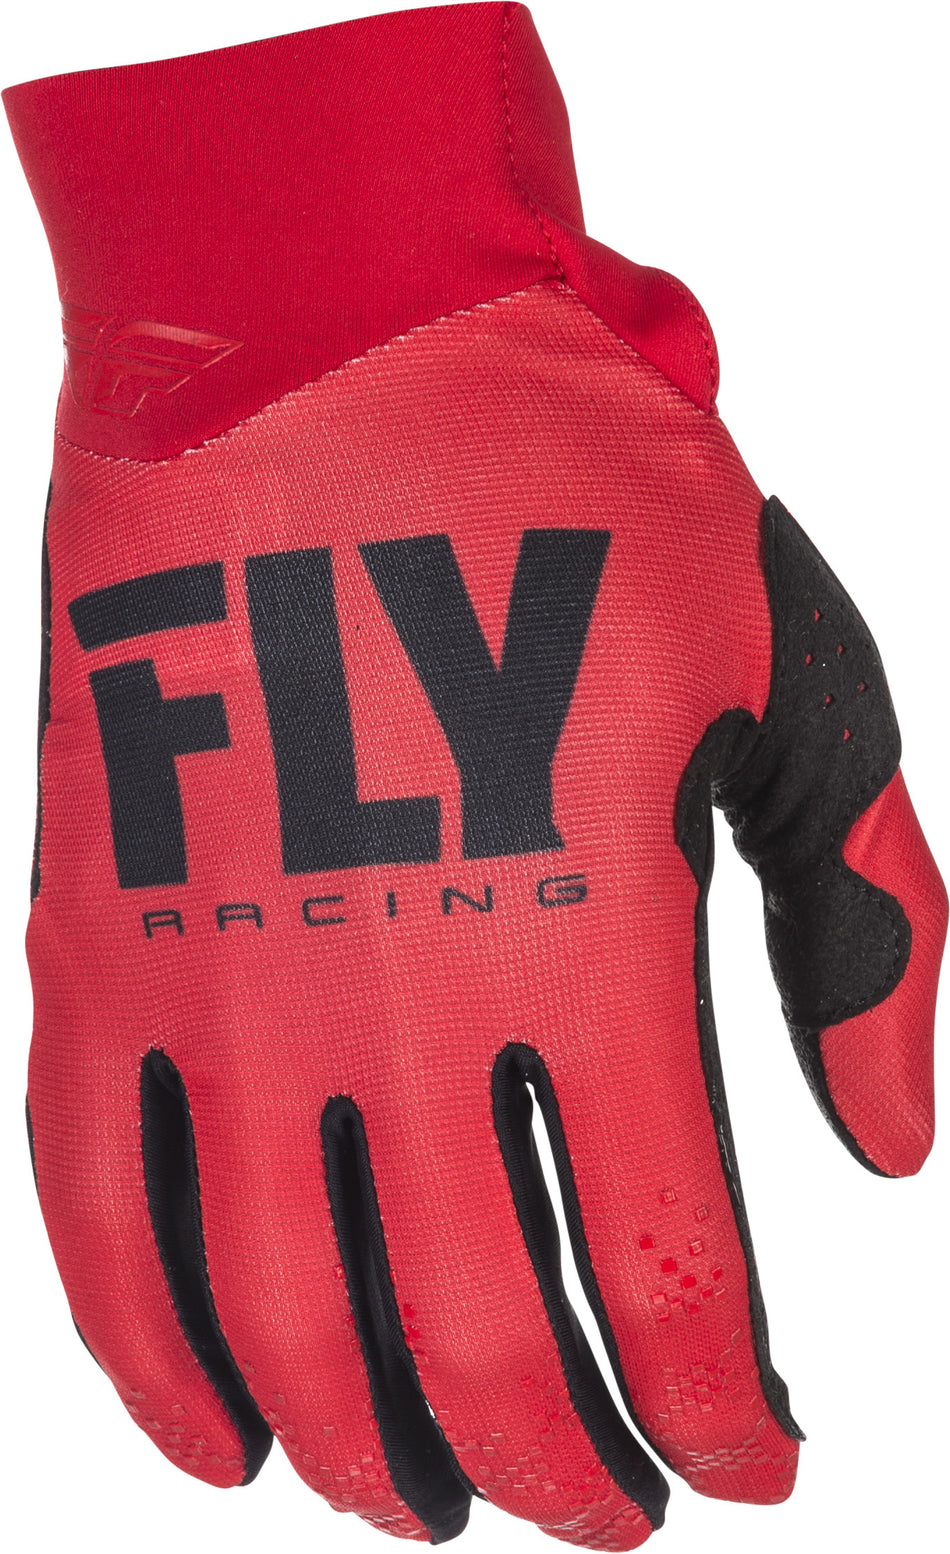 FLY RACING Pro Lite Gloves Red Sz 9 371-81209